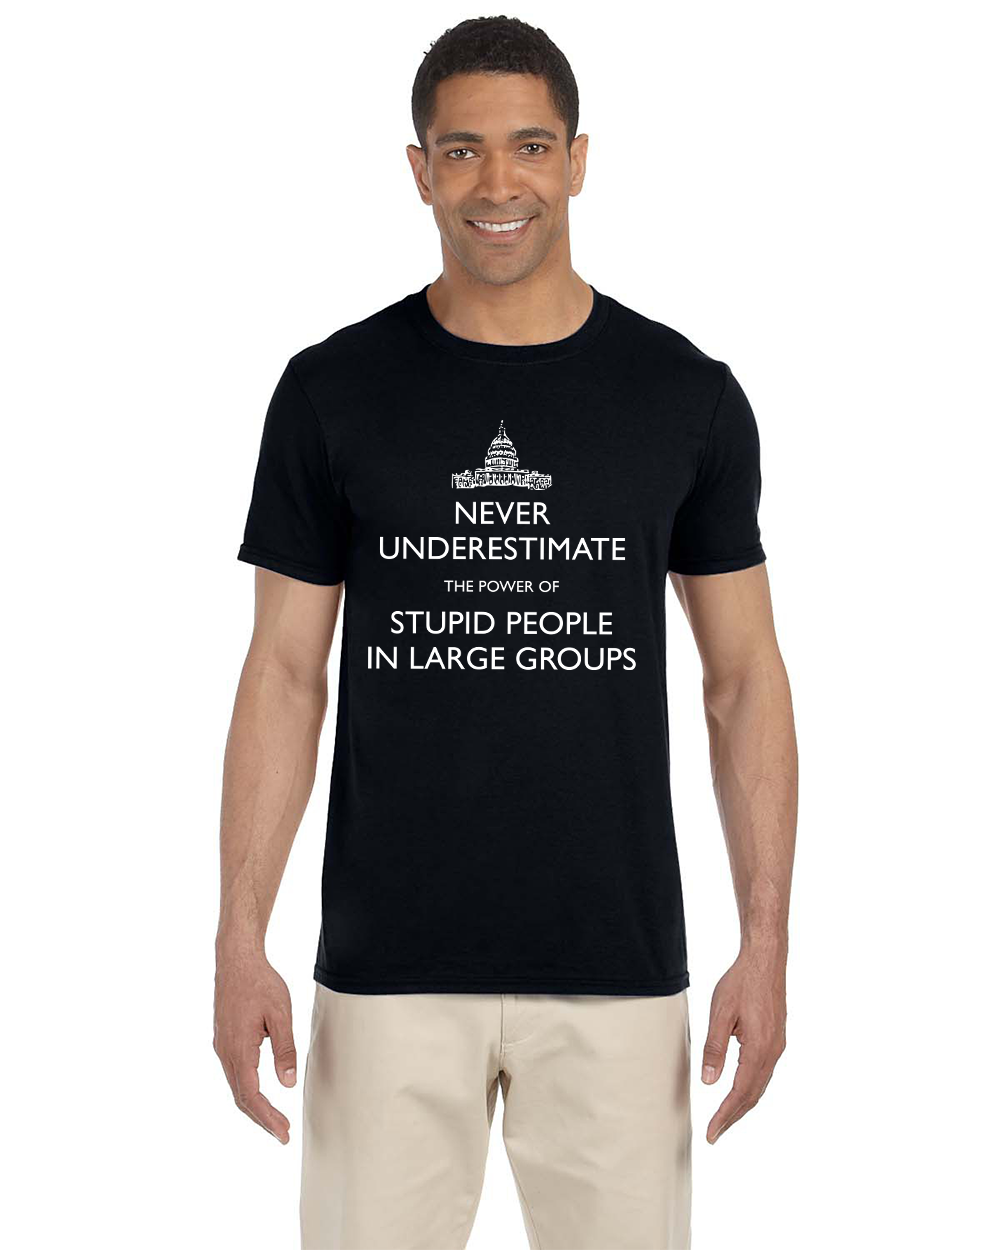 Never Underestimate the Power of Stupid People in Large Groups T-Shirt